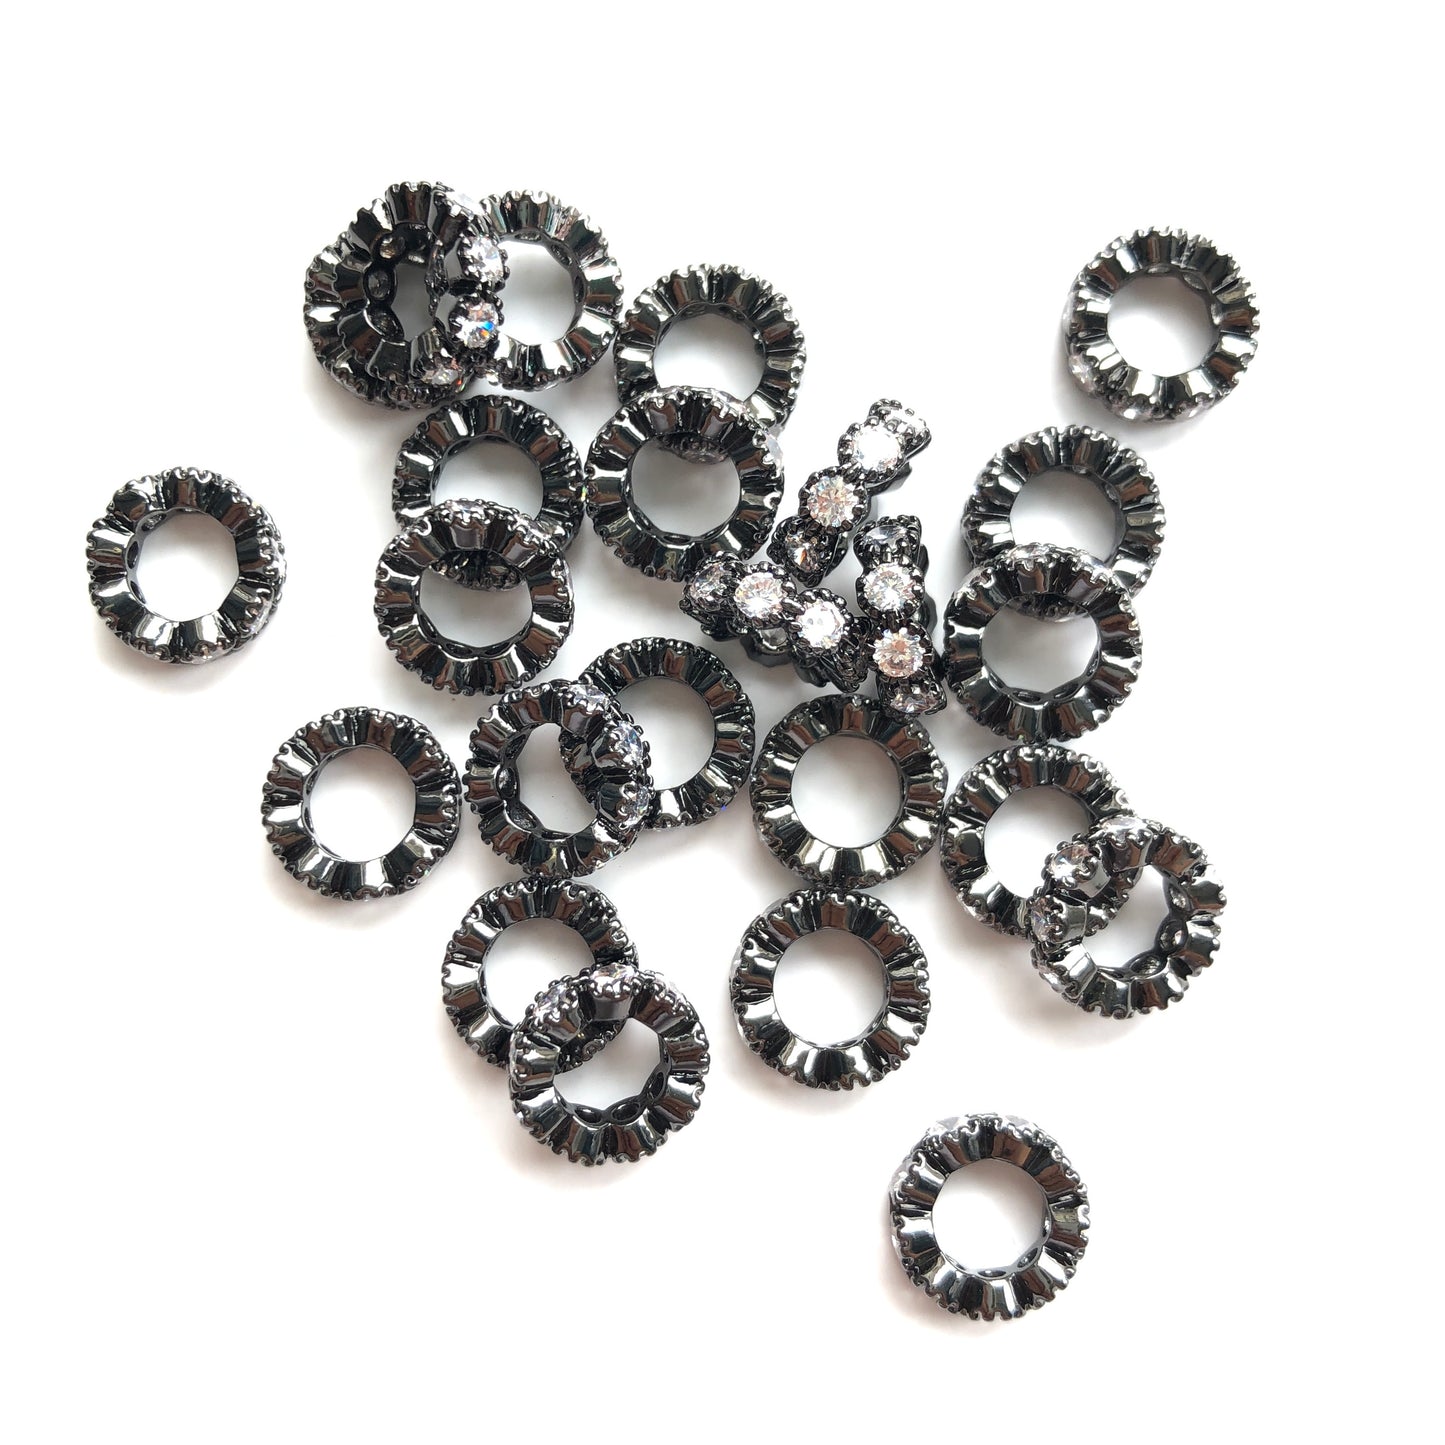 20pcs/lot 8/10mm Big Hole CZ Pave Wheel Rondelle Spacers Black CZ Paved Spacers New Spacers Arrivals Rondelle Beads Charms Beads Beyond